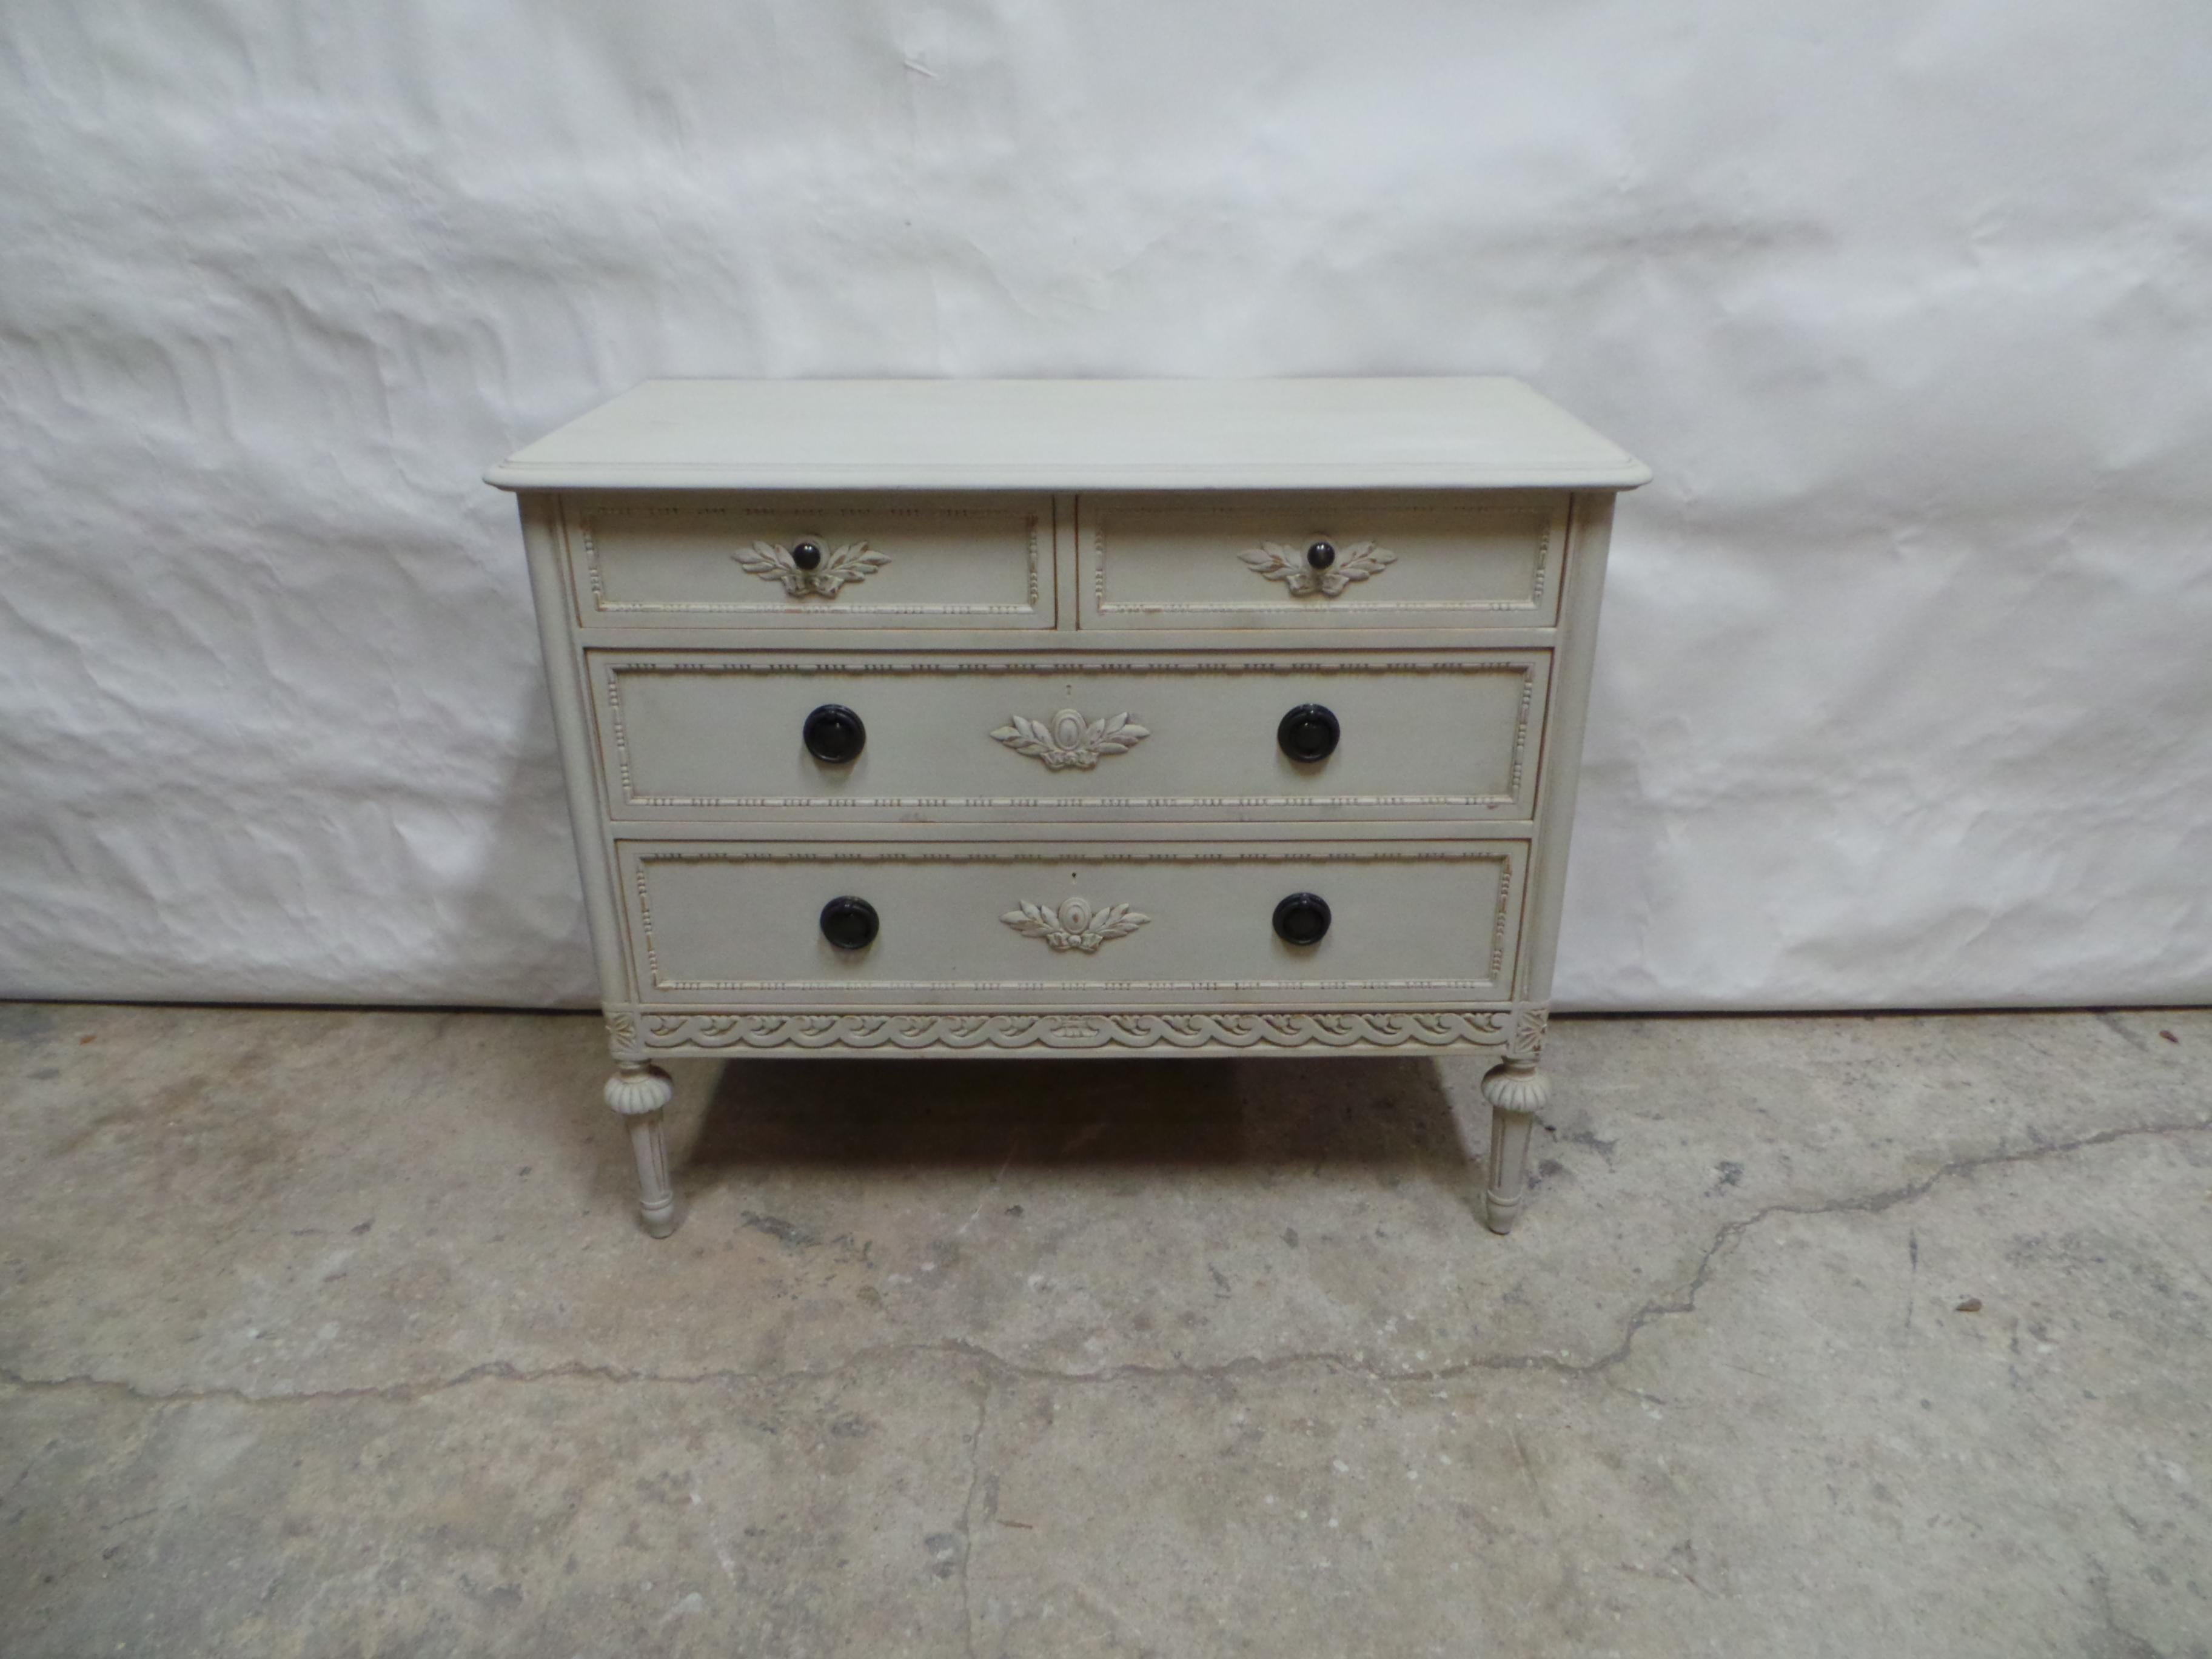 This is a unique Gustavian Style 3 Drawer Chest. its been restored and repainted with Milk Paints 